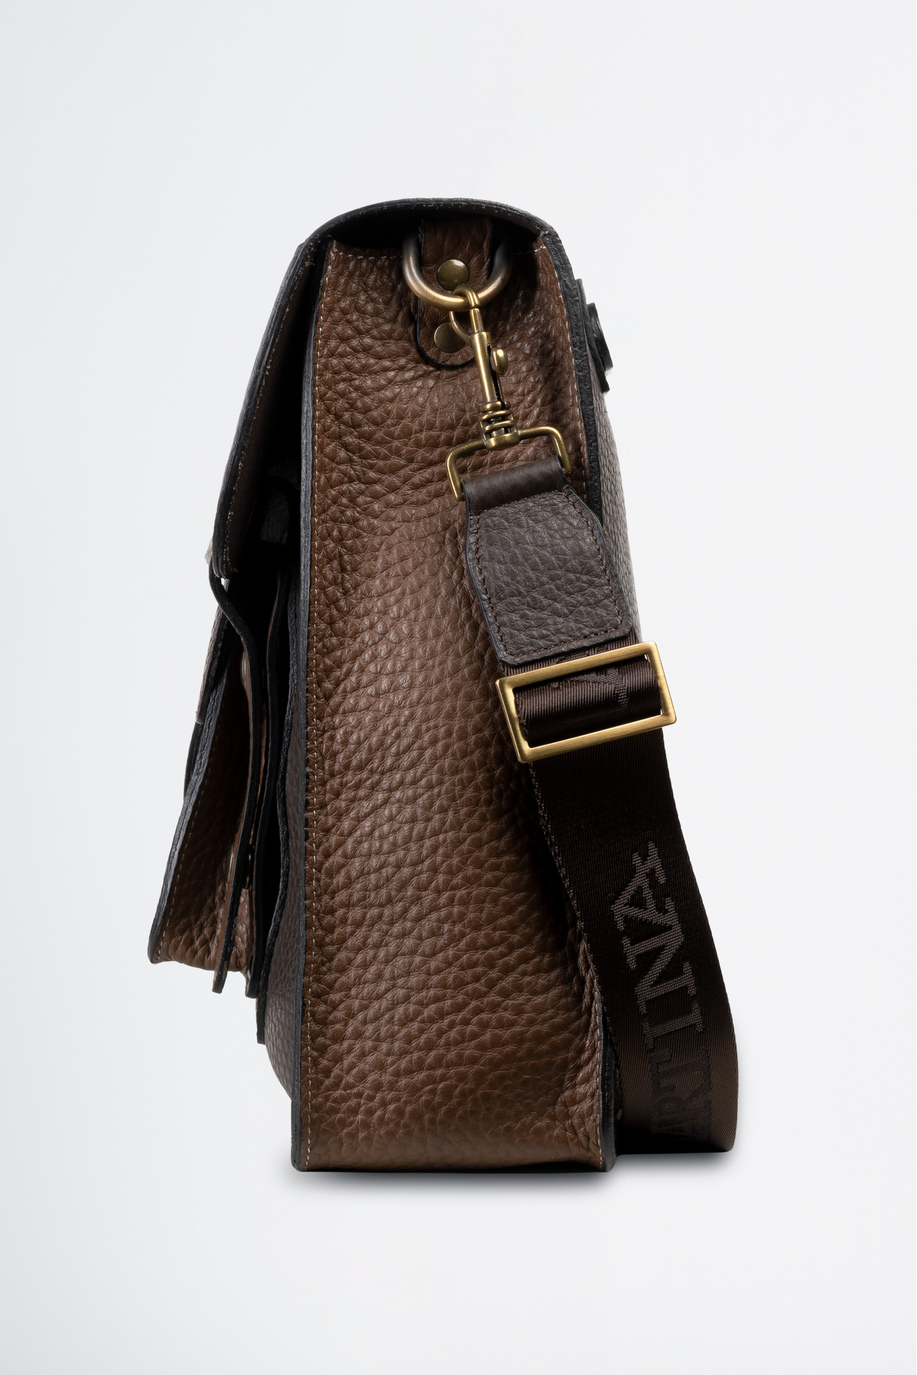 Briefcase bag in leather - Man leather goods | La Martina - Official Online Shop